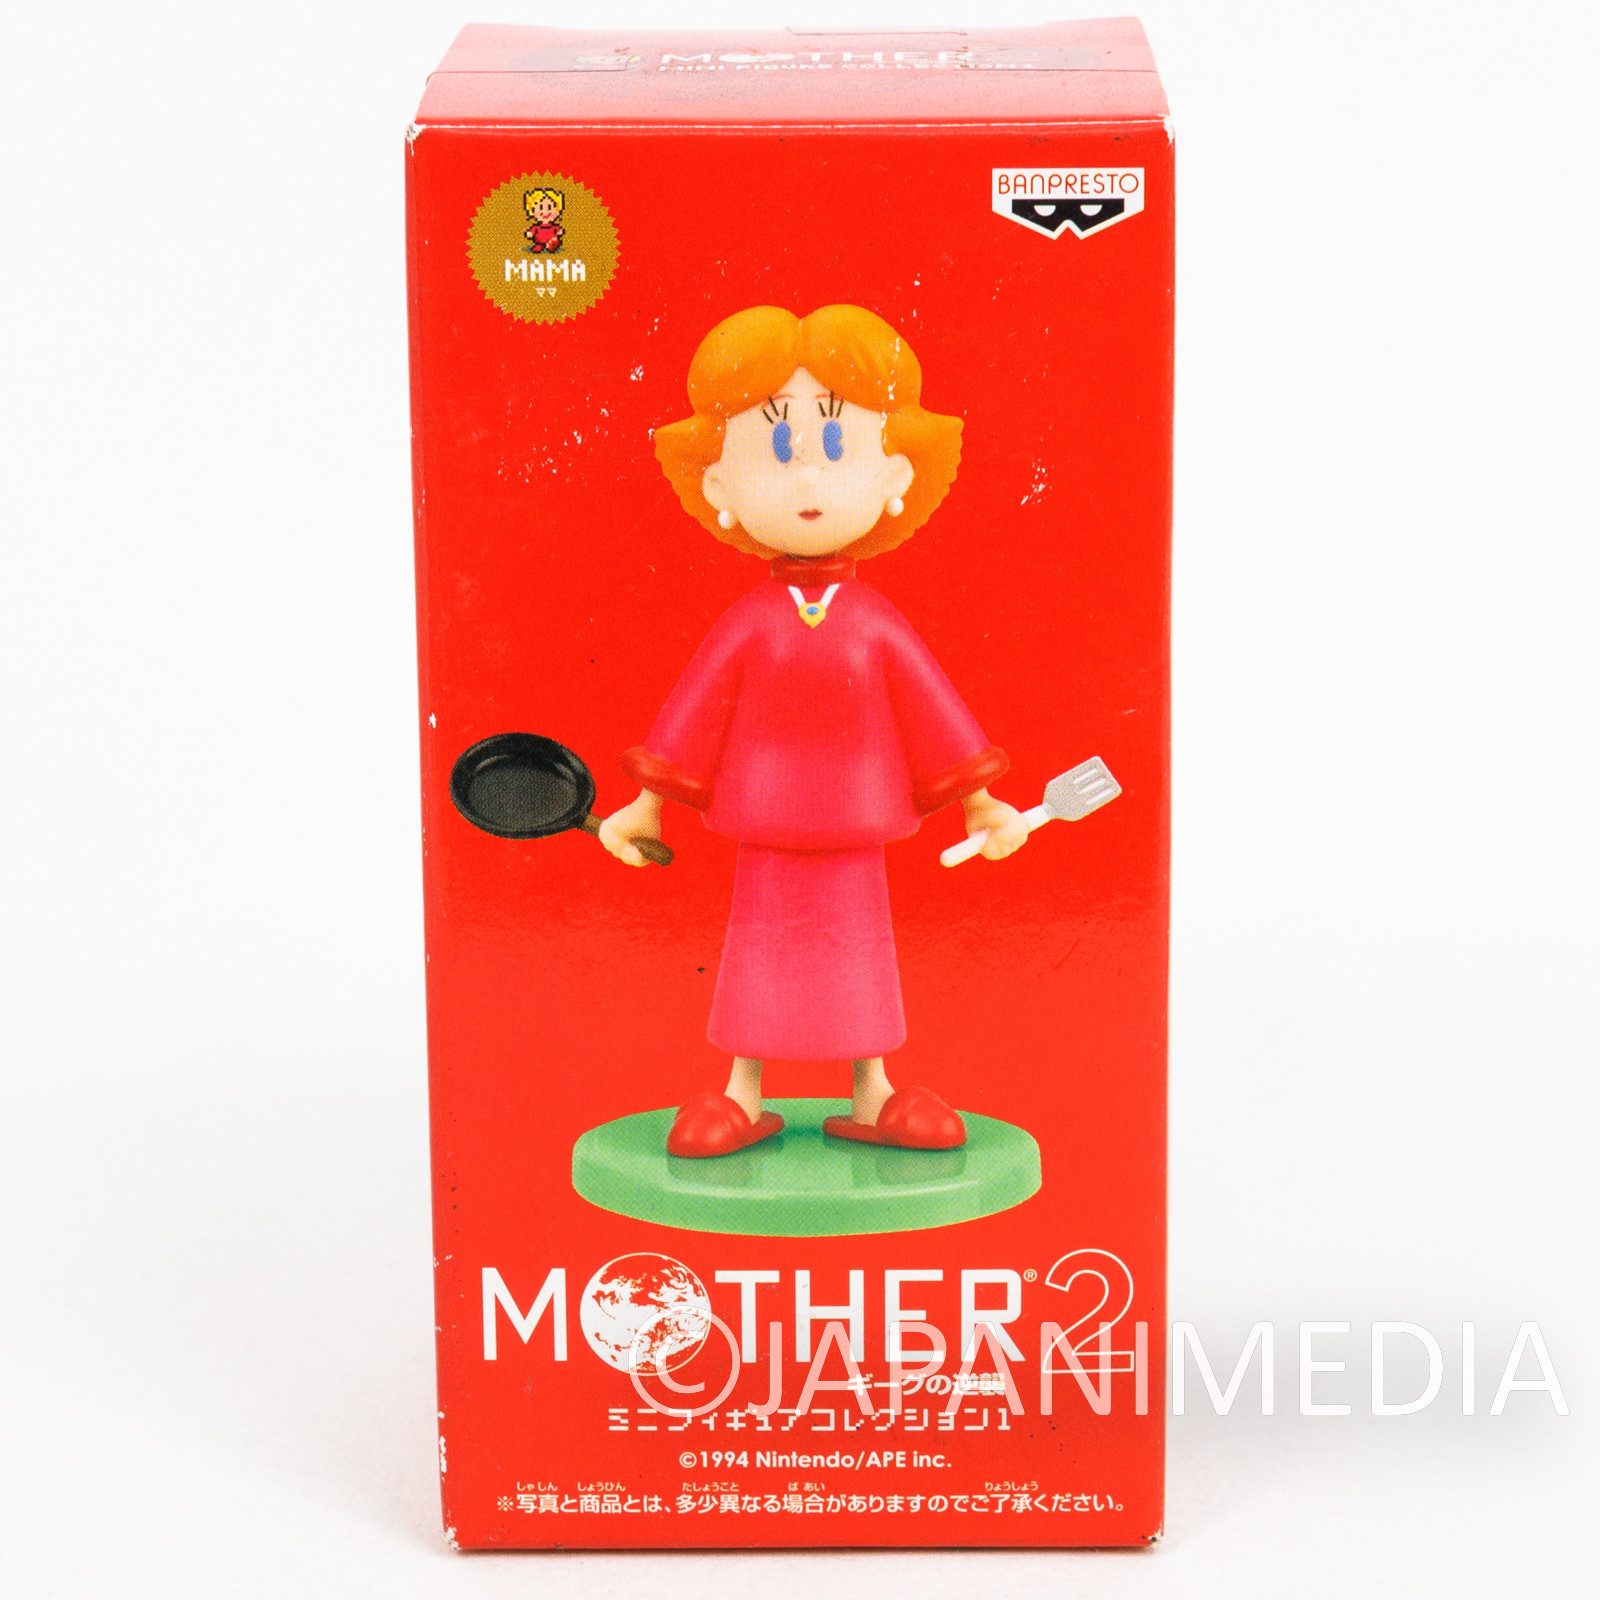 MOTHER 2 Ness's Mother Mini Figure Collection Earthbound NINTENDO NES